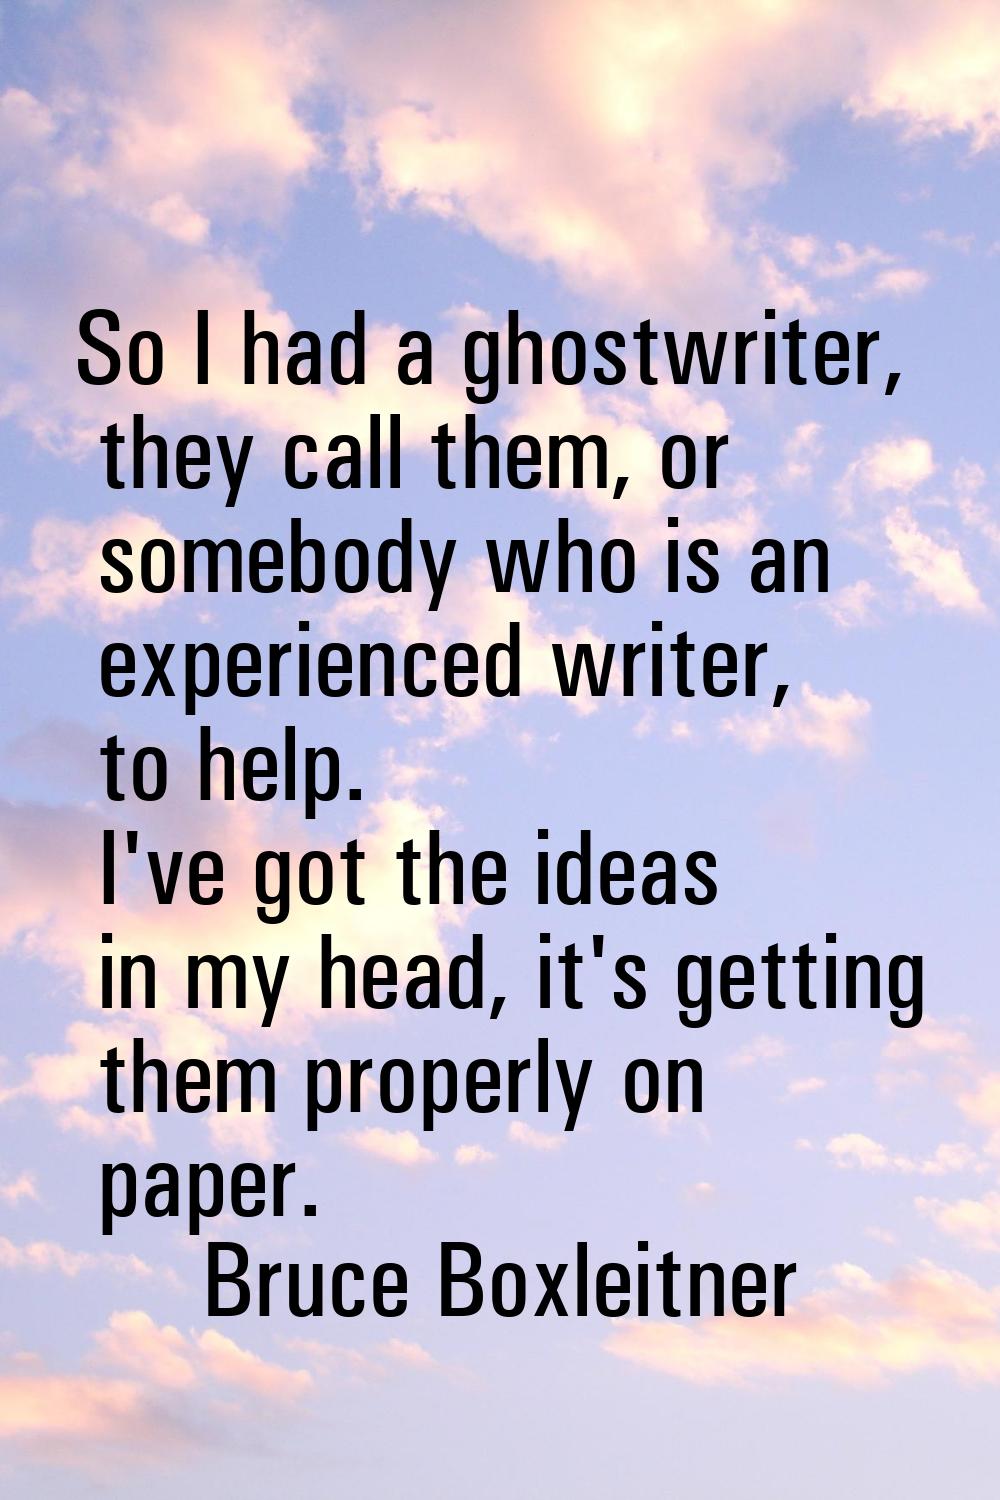 So I had a ghostwriter, they call them, or somebody who is an experienced writer, to help. I've got